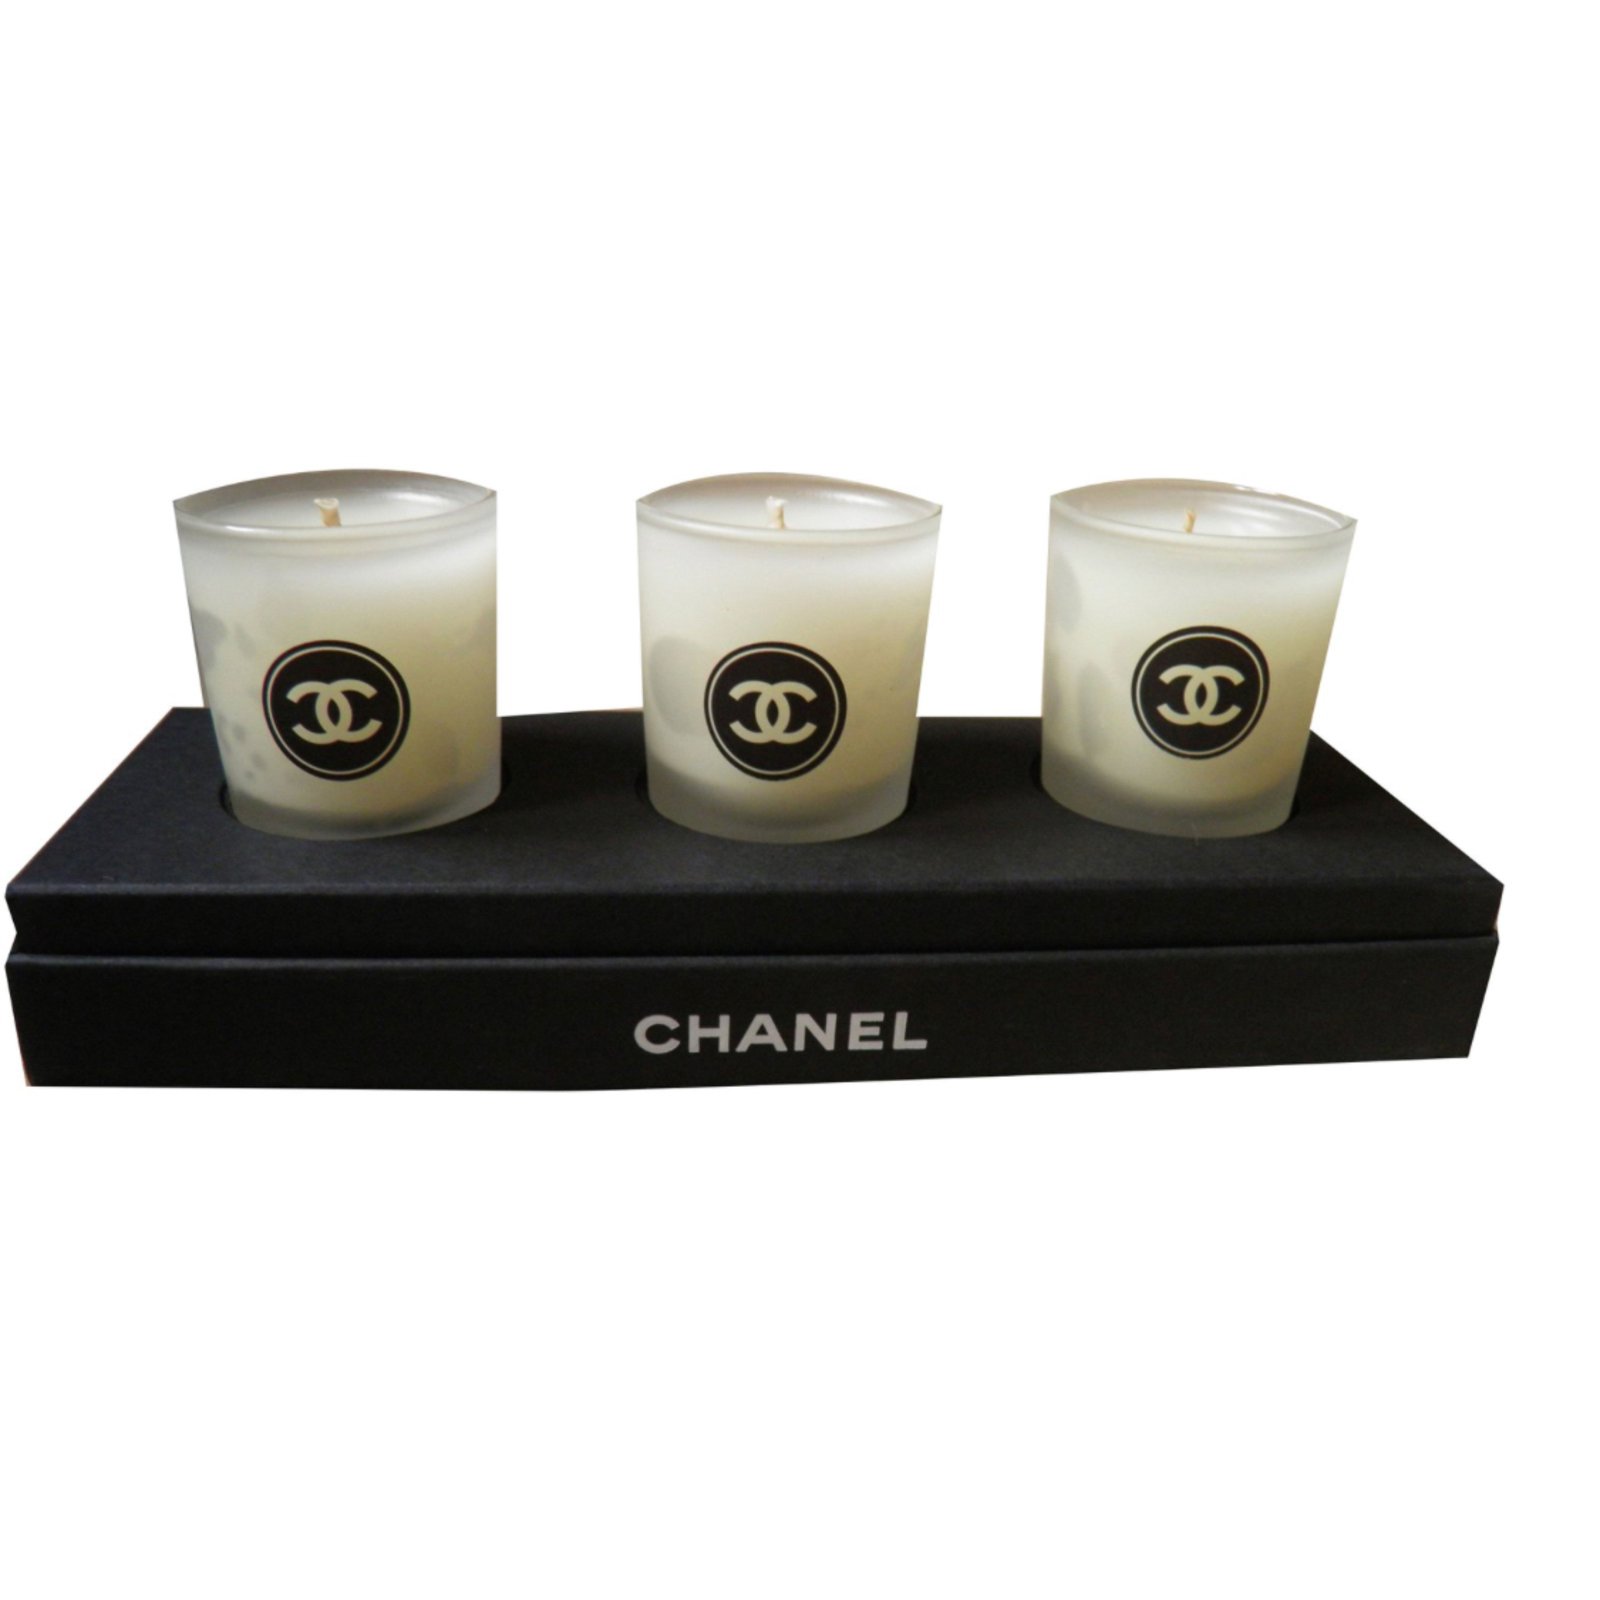 Chanel Candle Collection